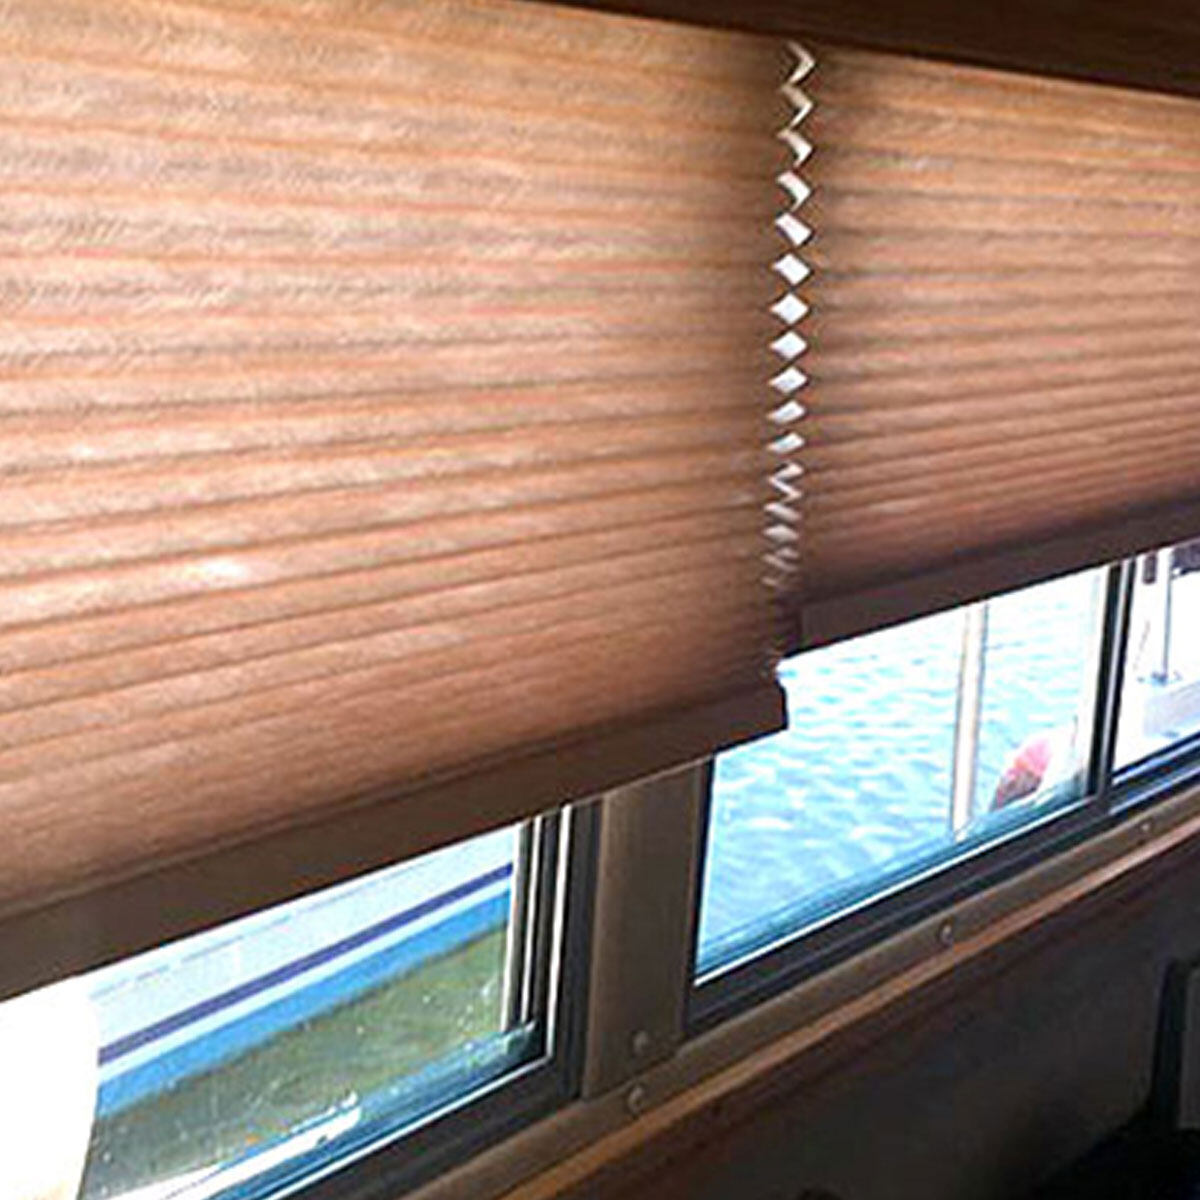 RV Blinds vs Shades: Which is Best for Your RV?